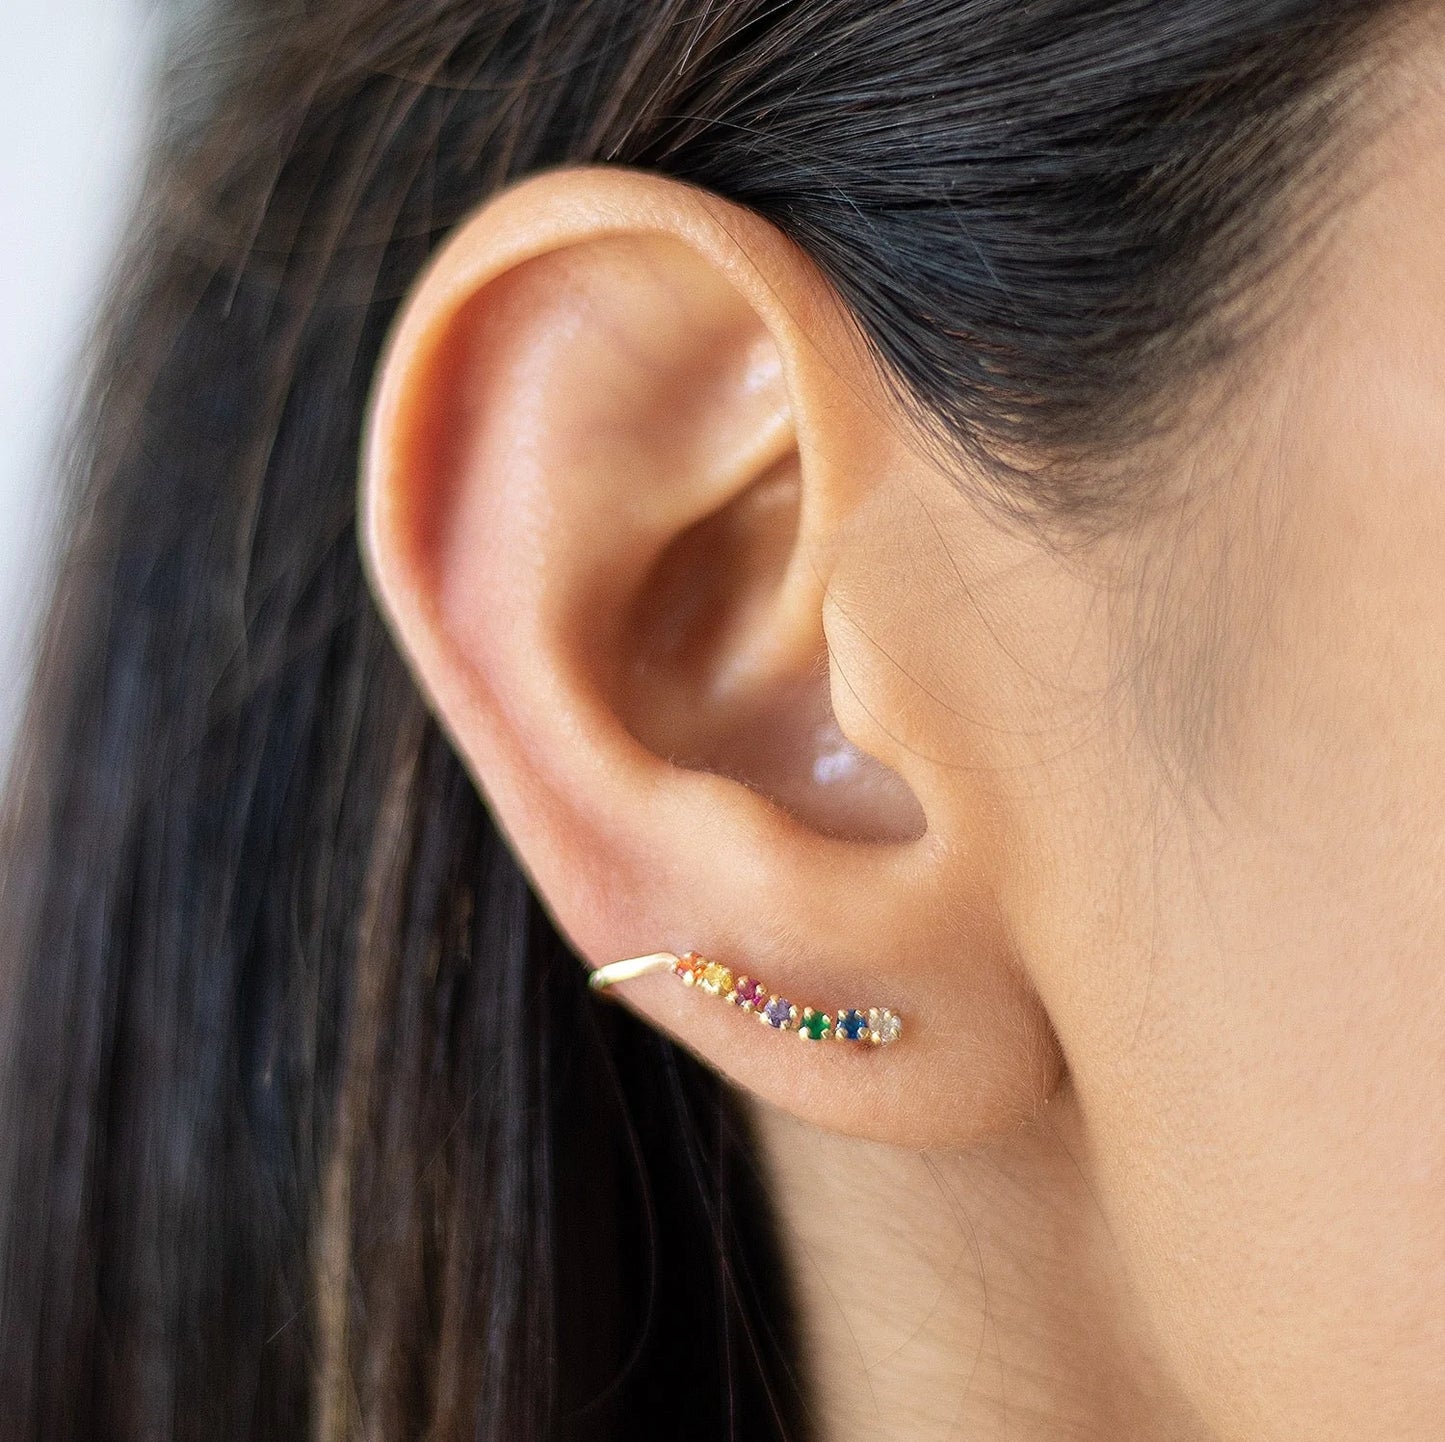 These gold earrings are in a beautiful geometric shape, with a minimalist design that is sure to get you some compliments. They look great with any outfit and can be worn for any occasion! 